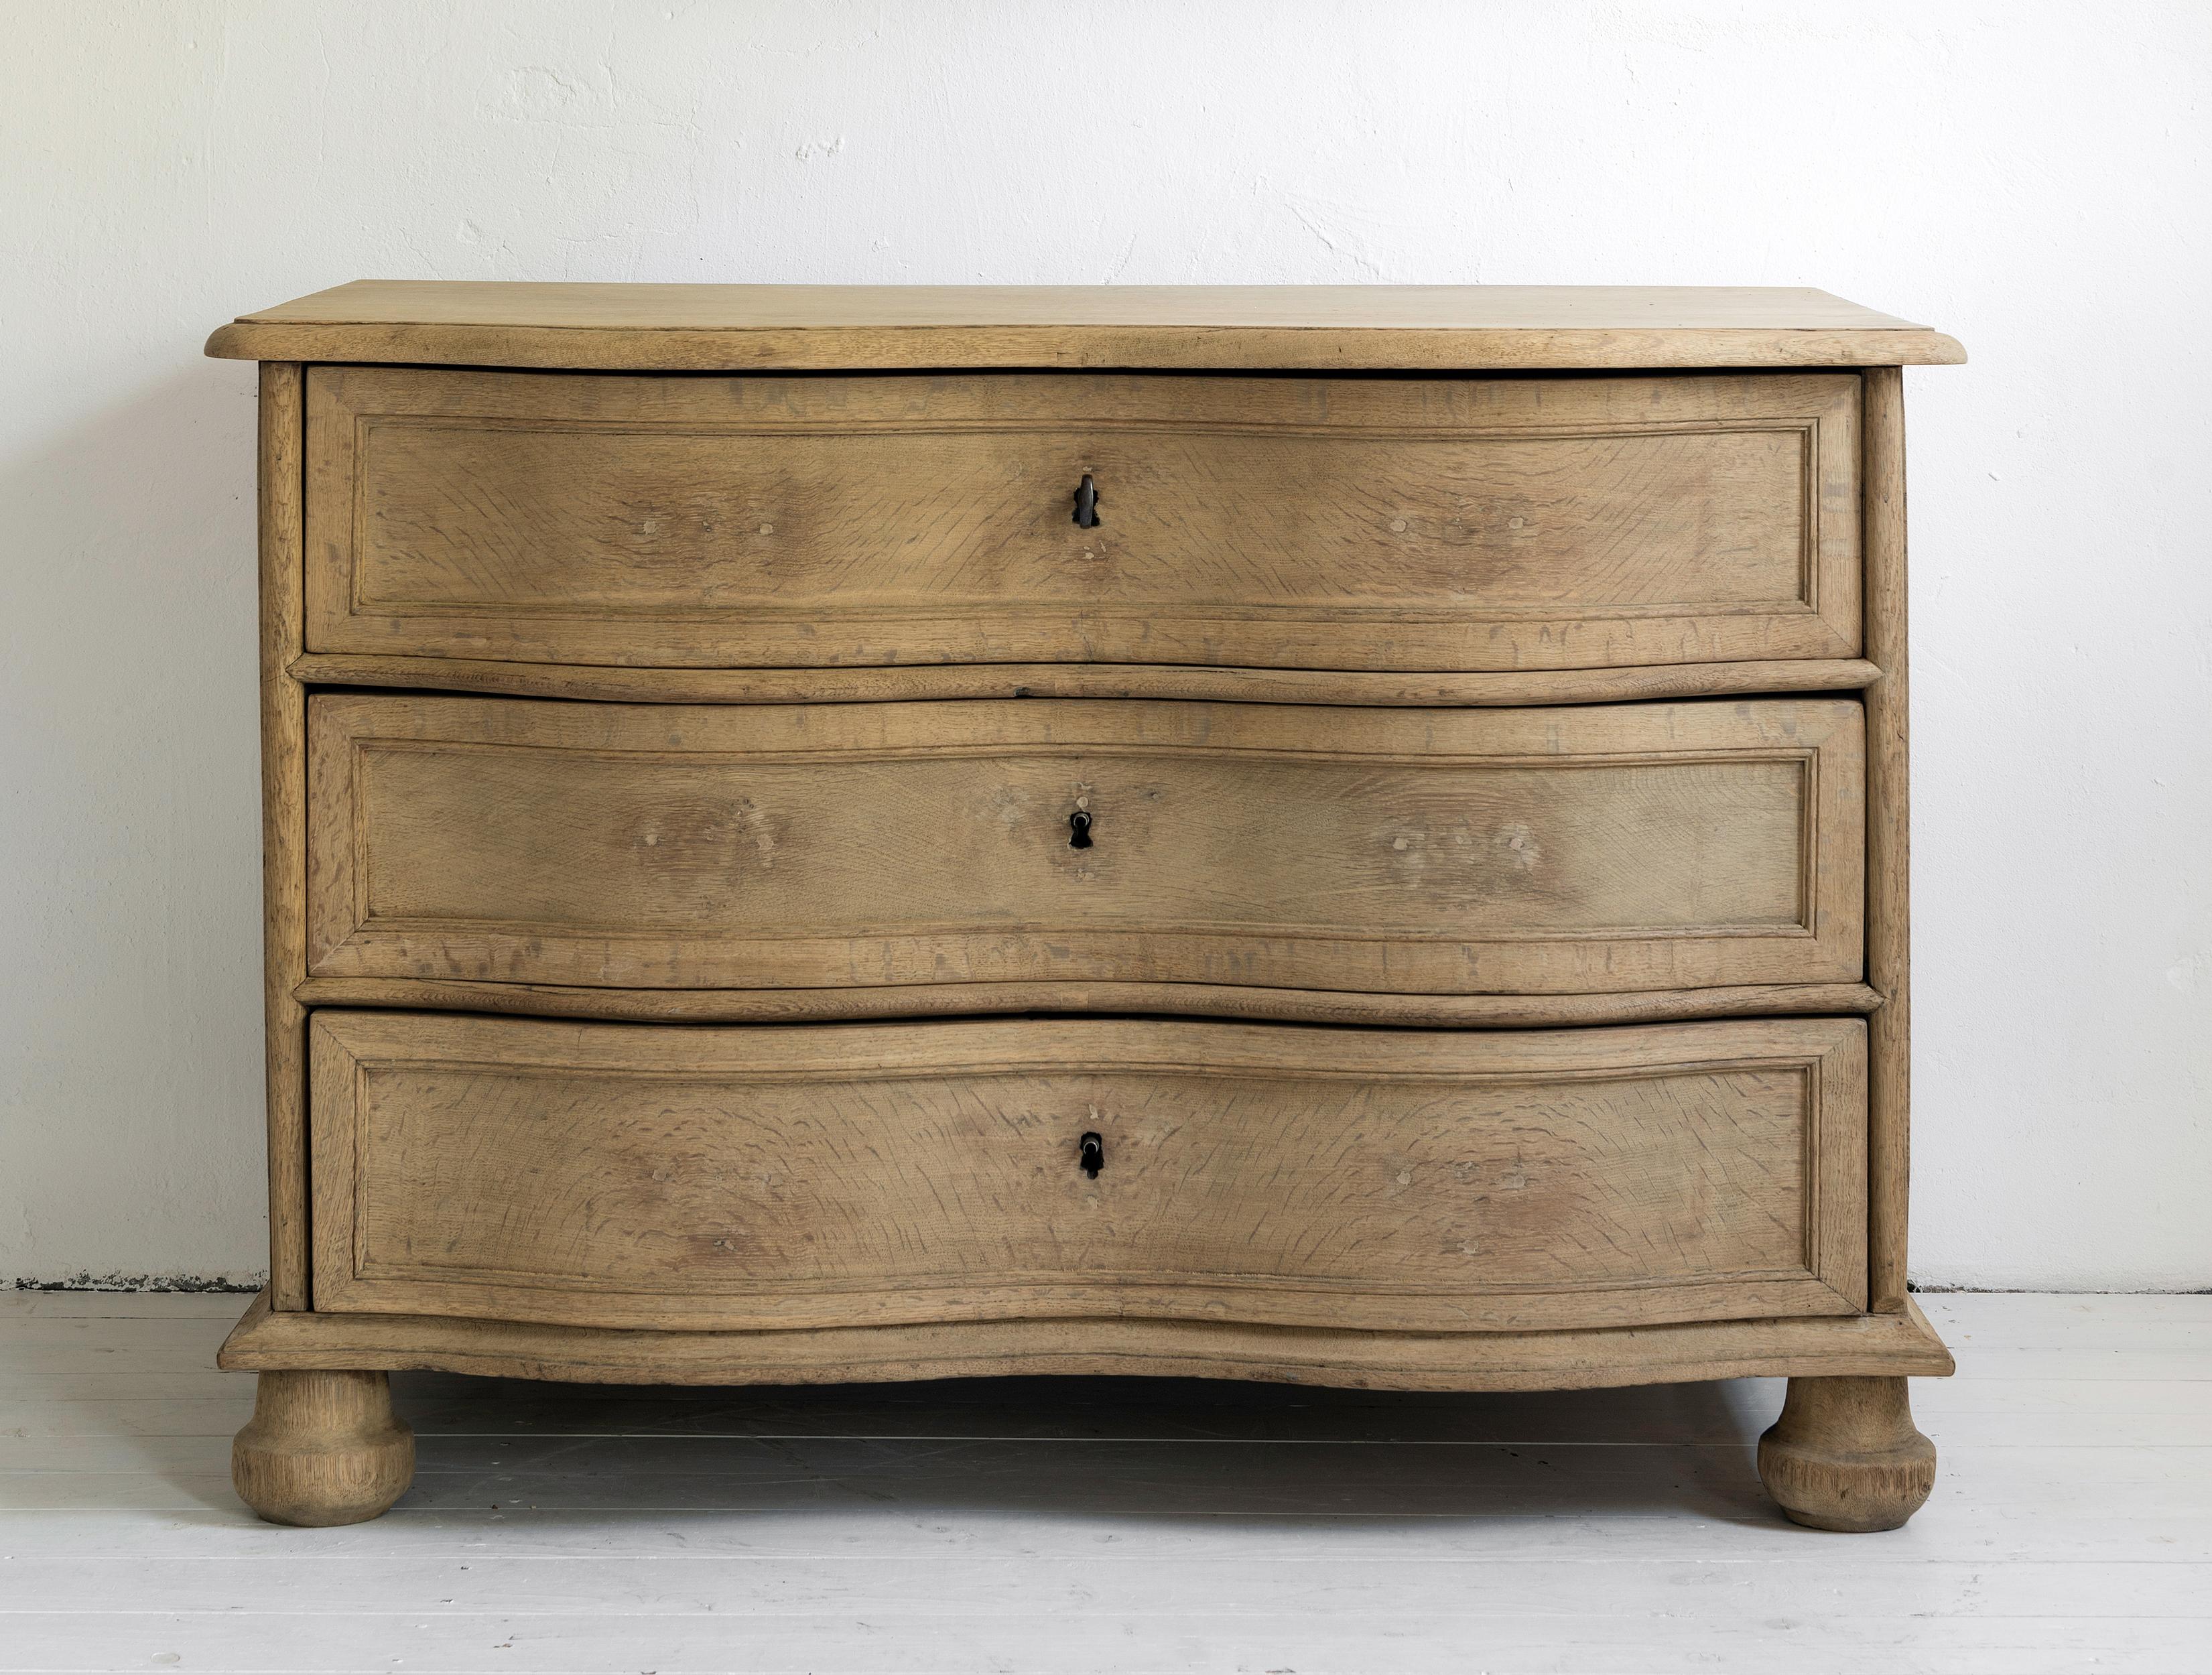 Beautiful simple Swedish, Danish, or Schleswig- Holstein 18th century Baroque commode Galbée in oak. Soft, undulating lines to the front. Stunning, authentic piece, proudly showing marks, repairs and alterations. 
A piece of great elegance and